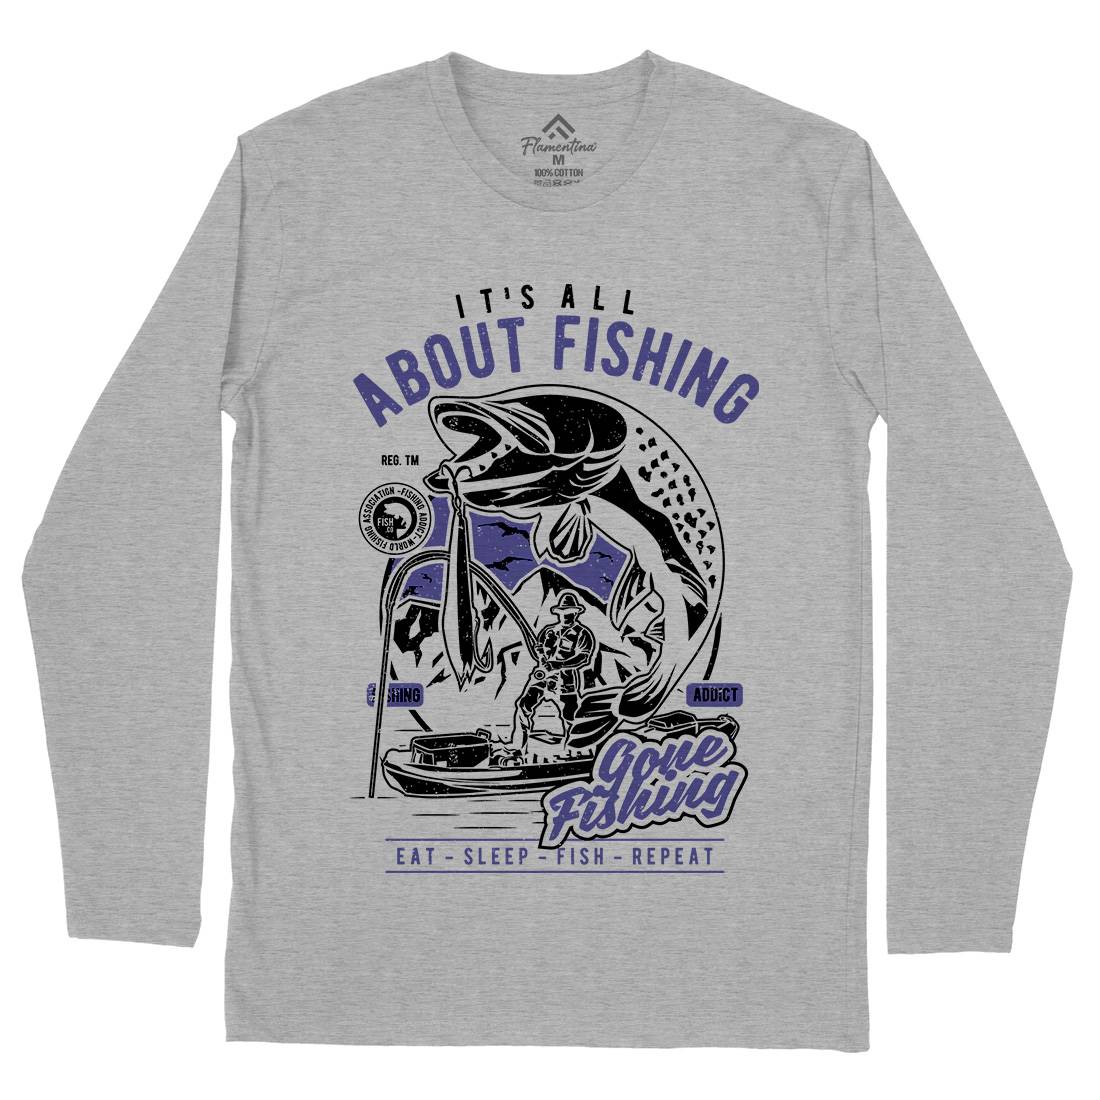 All About Mens Long Sleeve T-Shirt Fishing A604